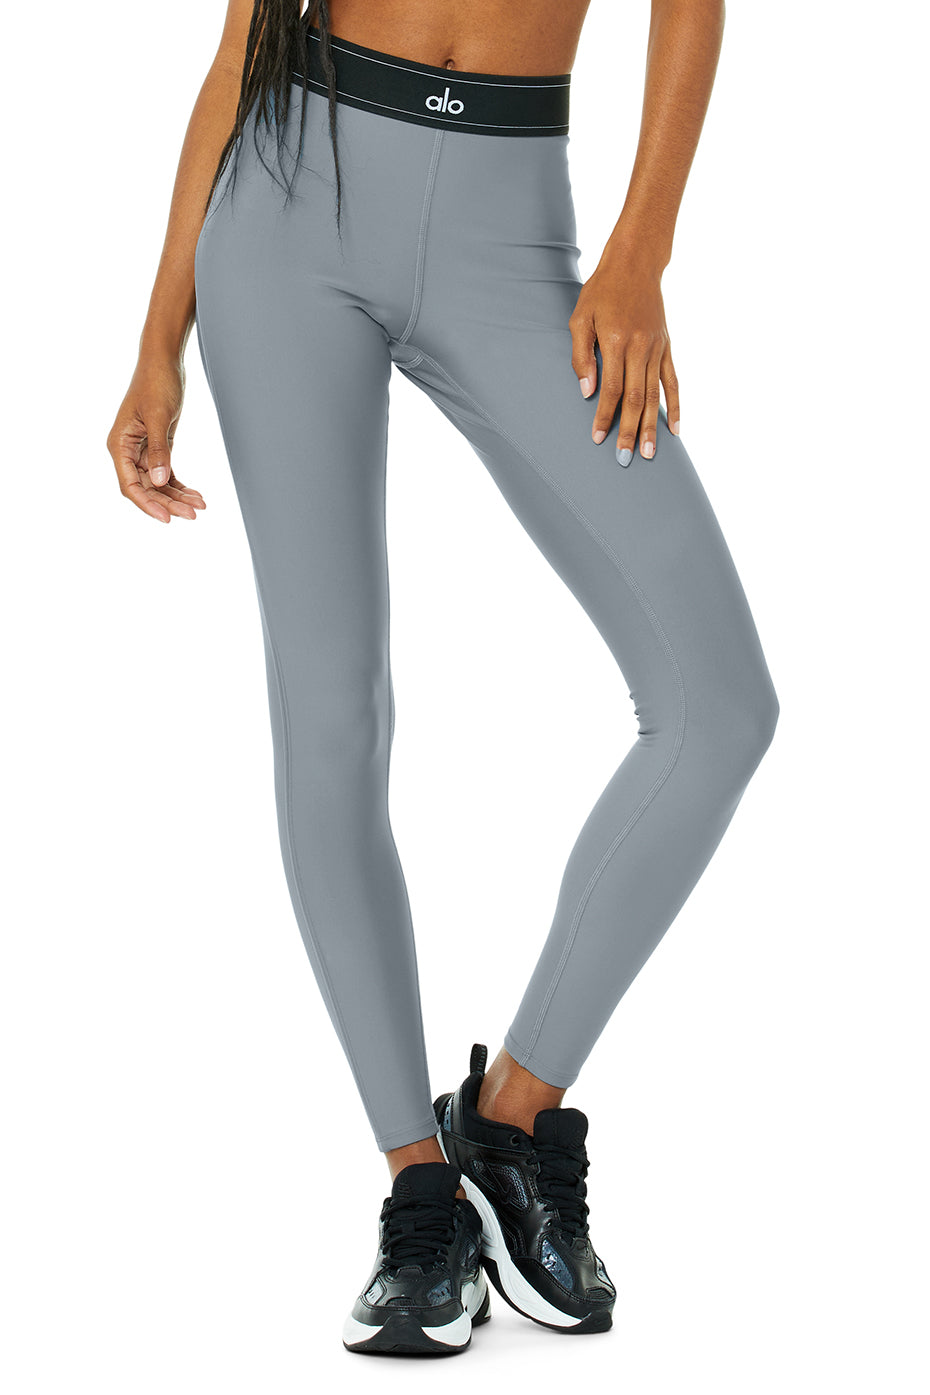 Airlift High-Waist Suit Up Legging in Steel Blue by Alo Yoga